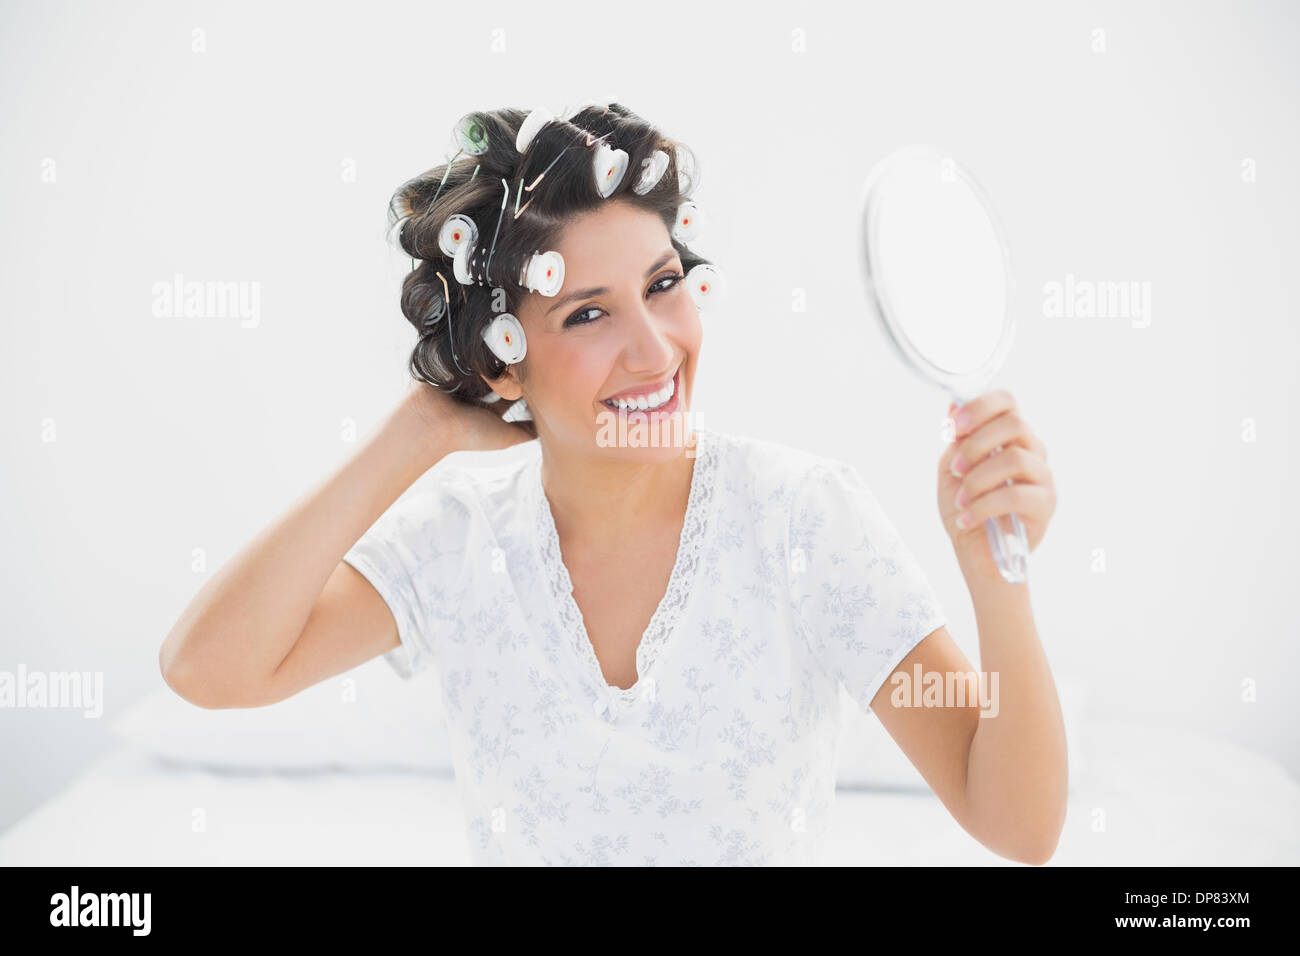 Smiling brunette in hair rollers holding hand mirror Stock Photo